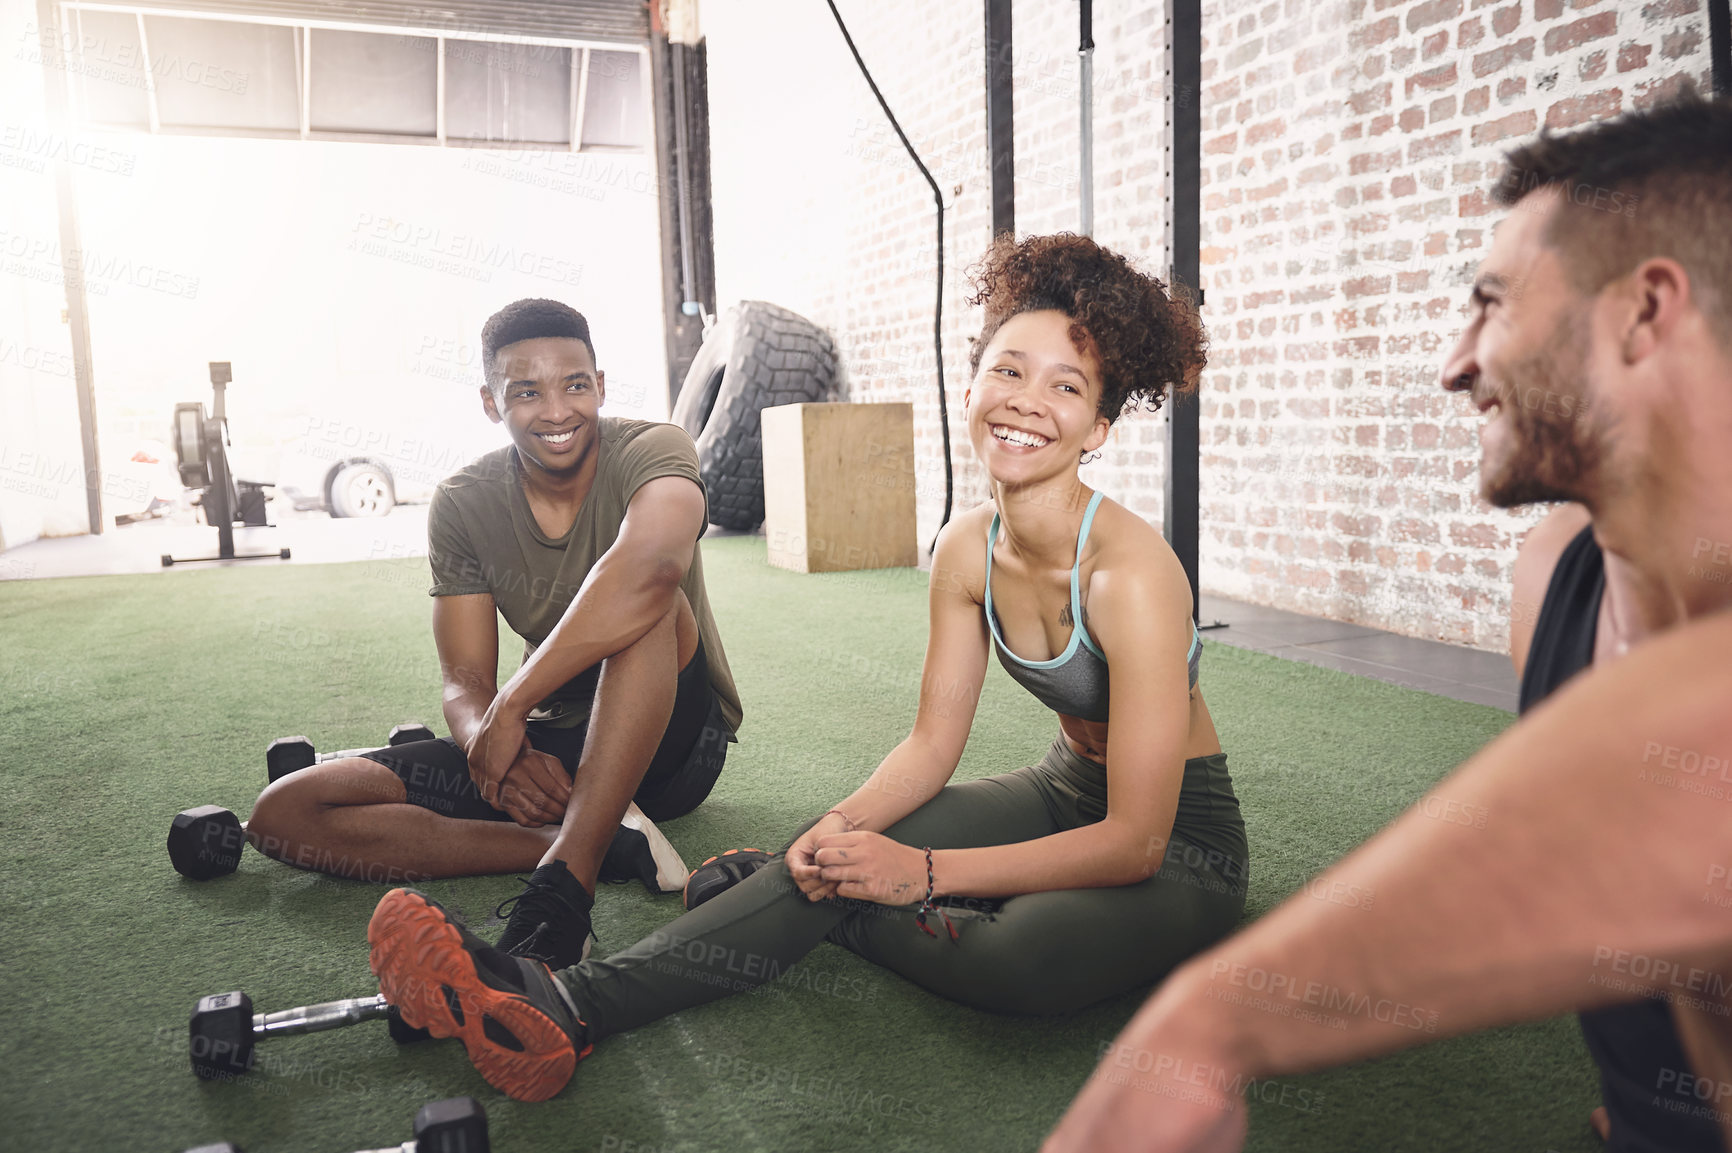 Buy stock photo Shot of three sporty young people talking while sitting together in a gym